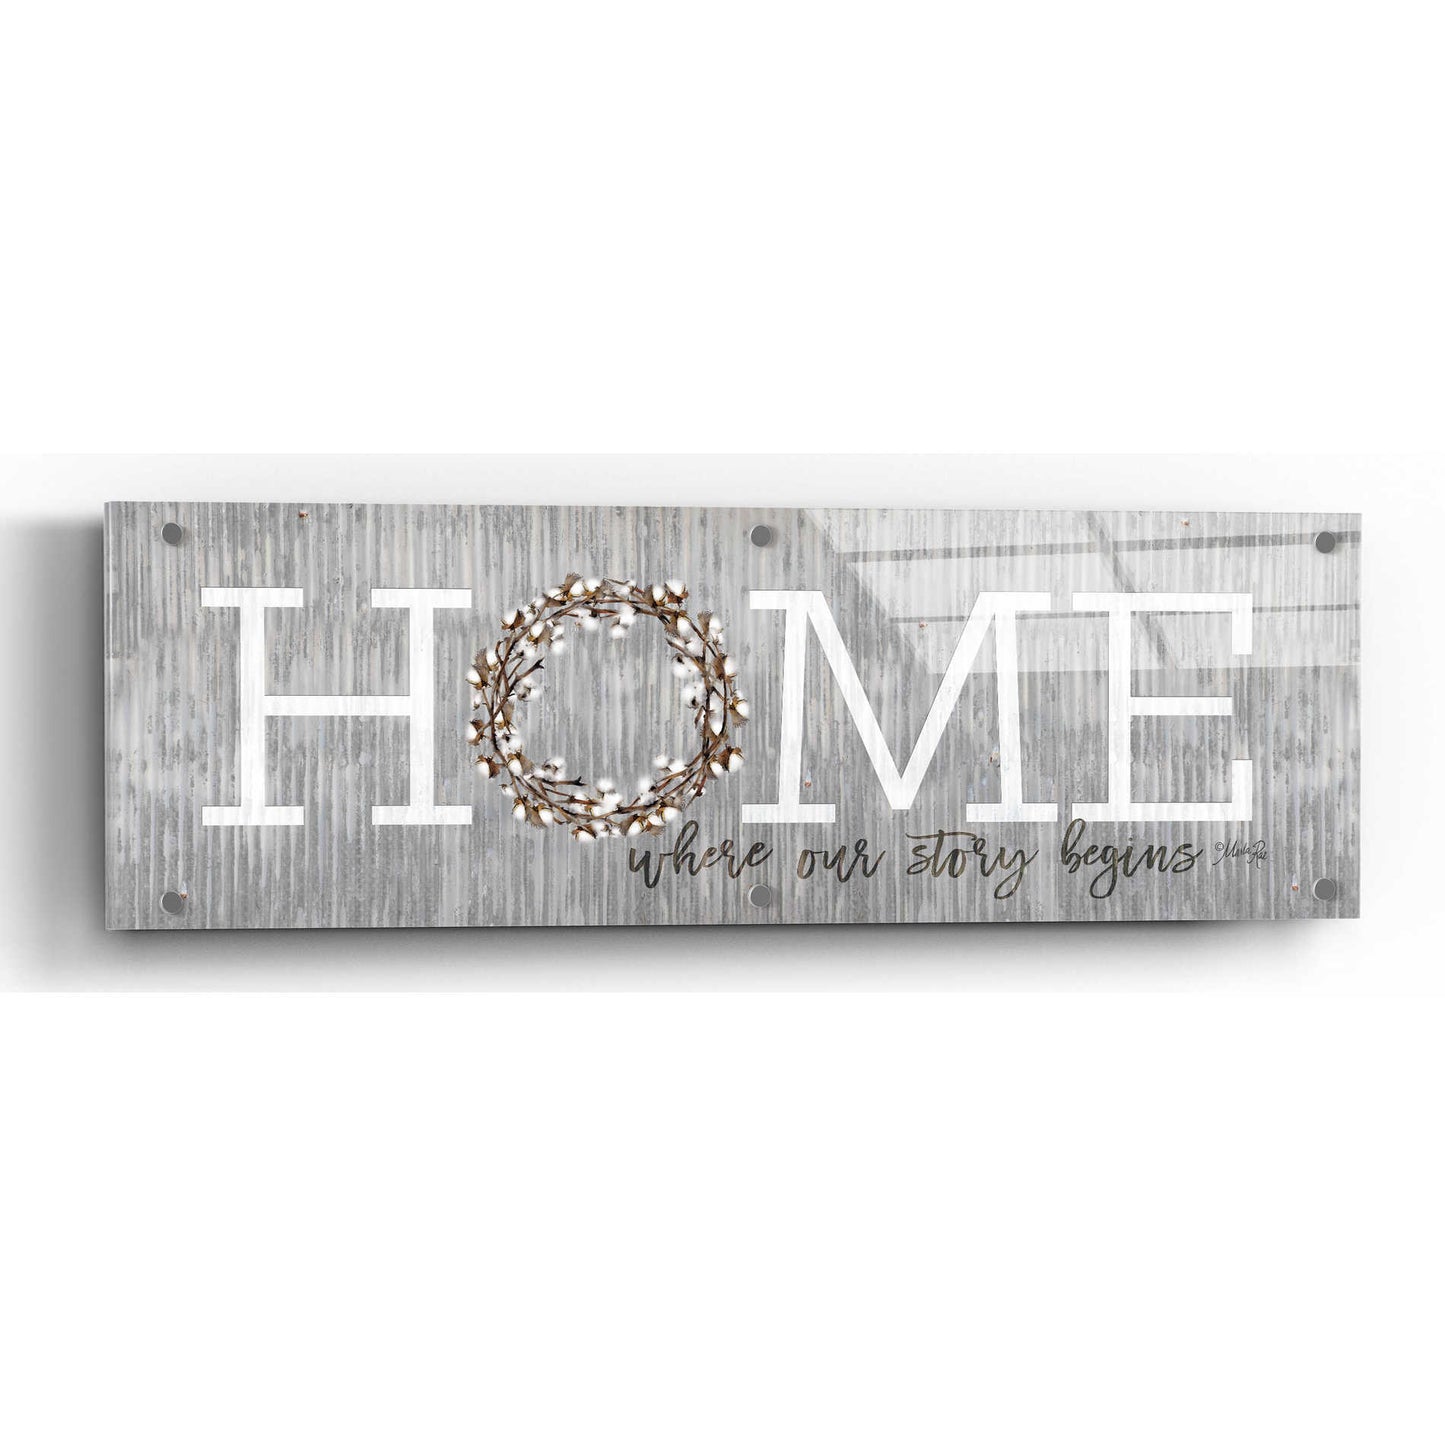 Epic Art 'Home - Where Our Story Begins' by Marla Rae, Acrylic Glass Wall Art,48x16